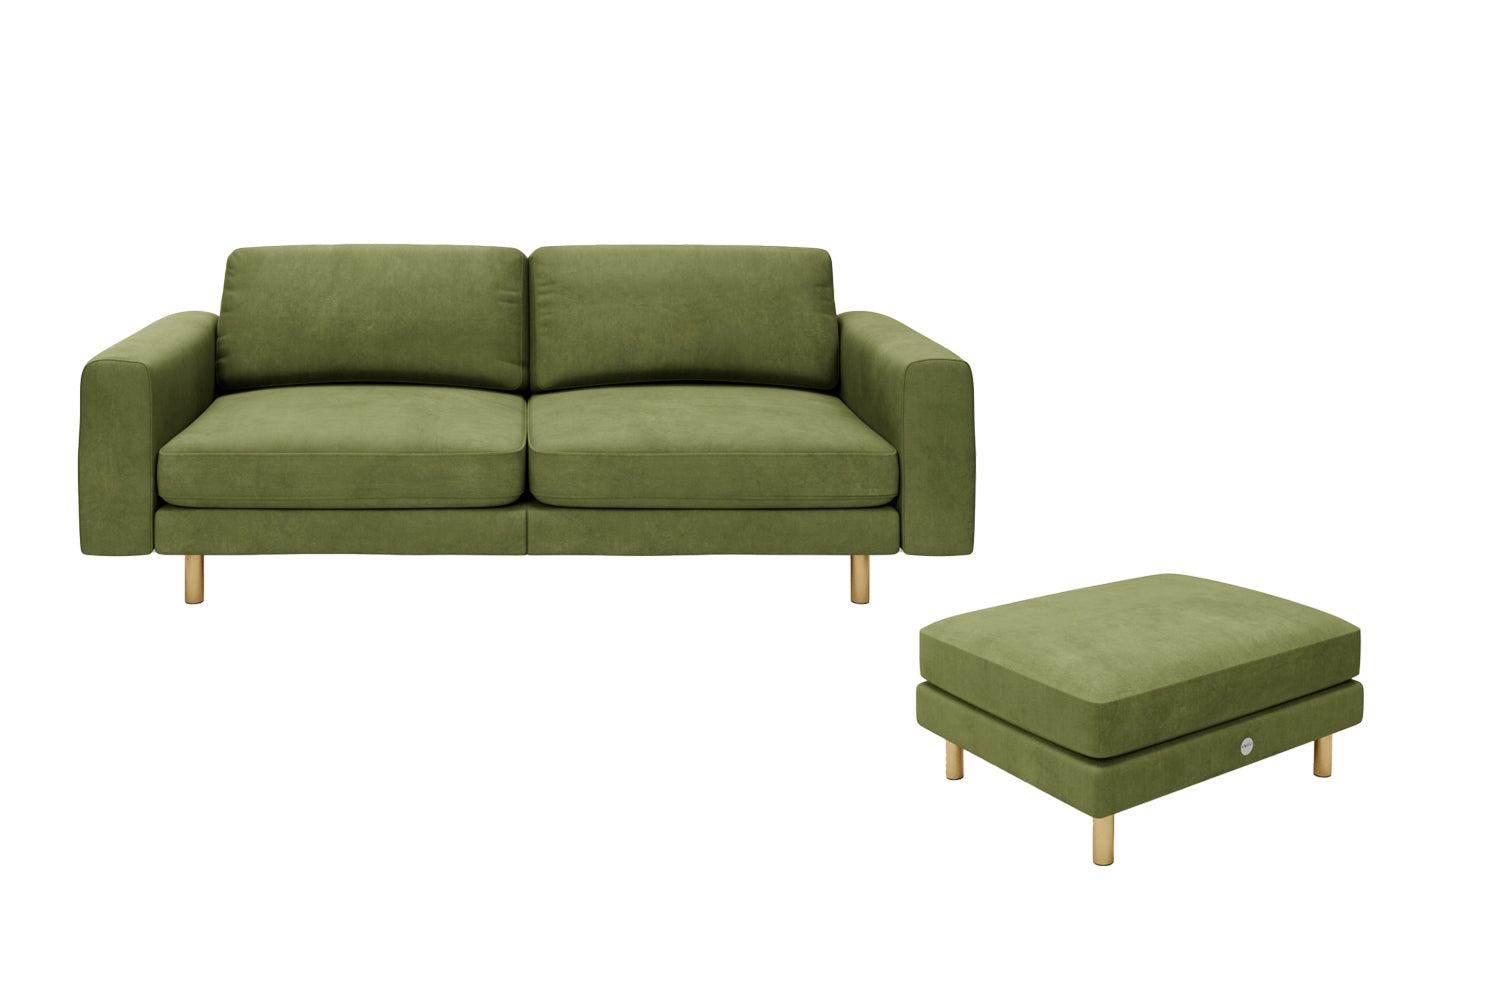 The Big Chill - 3 Seater Sofa and Footstool Set - Olive